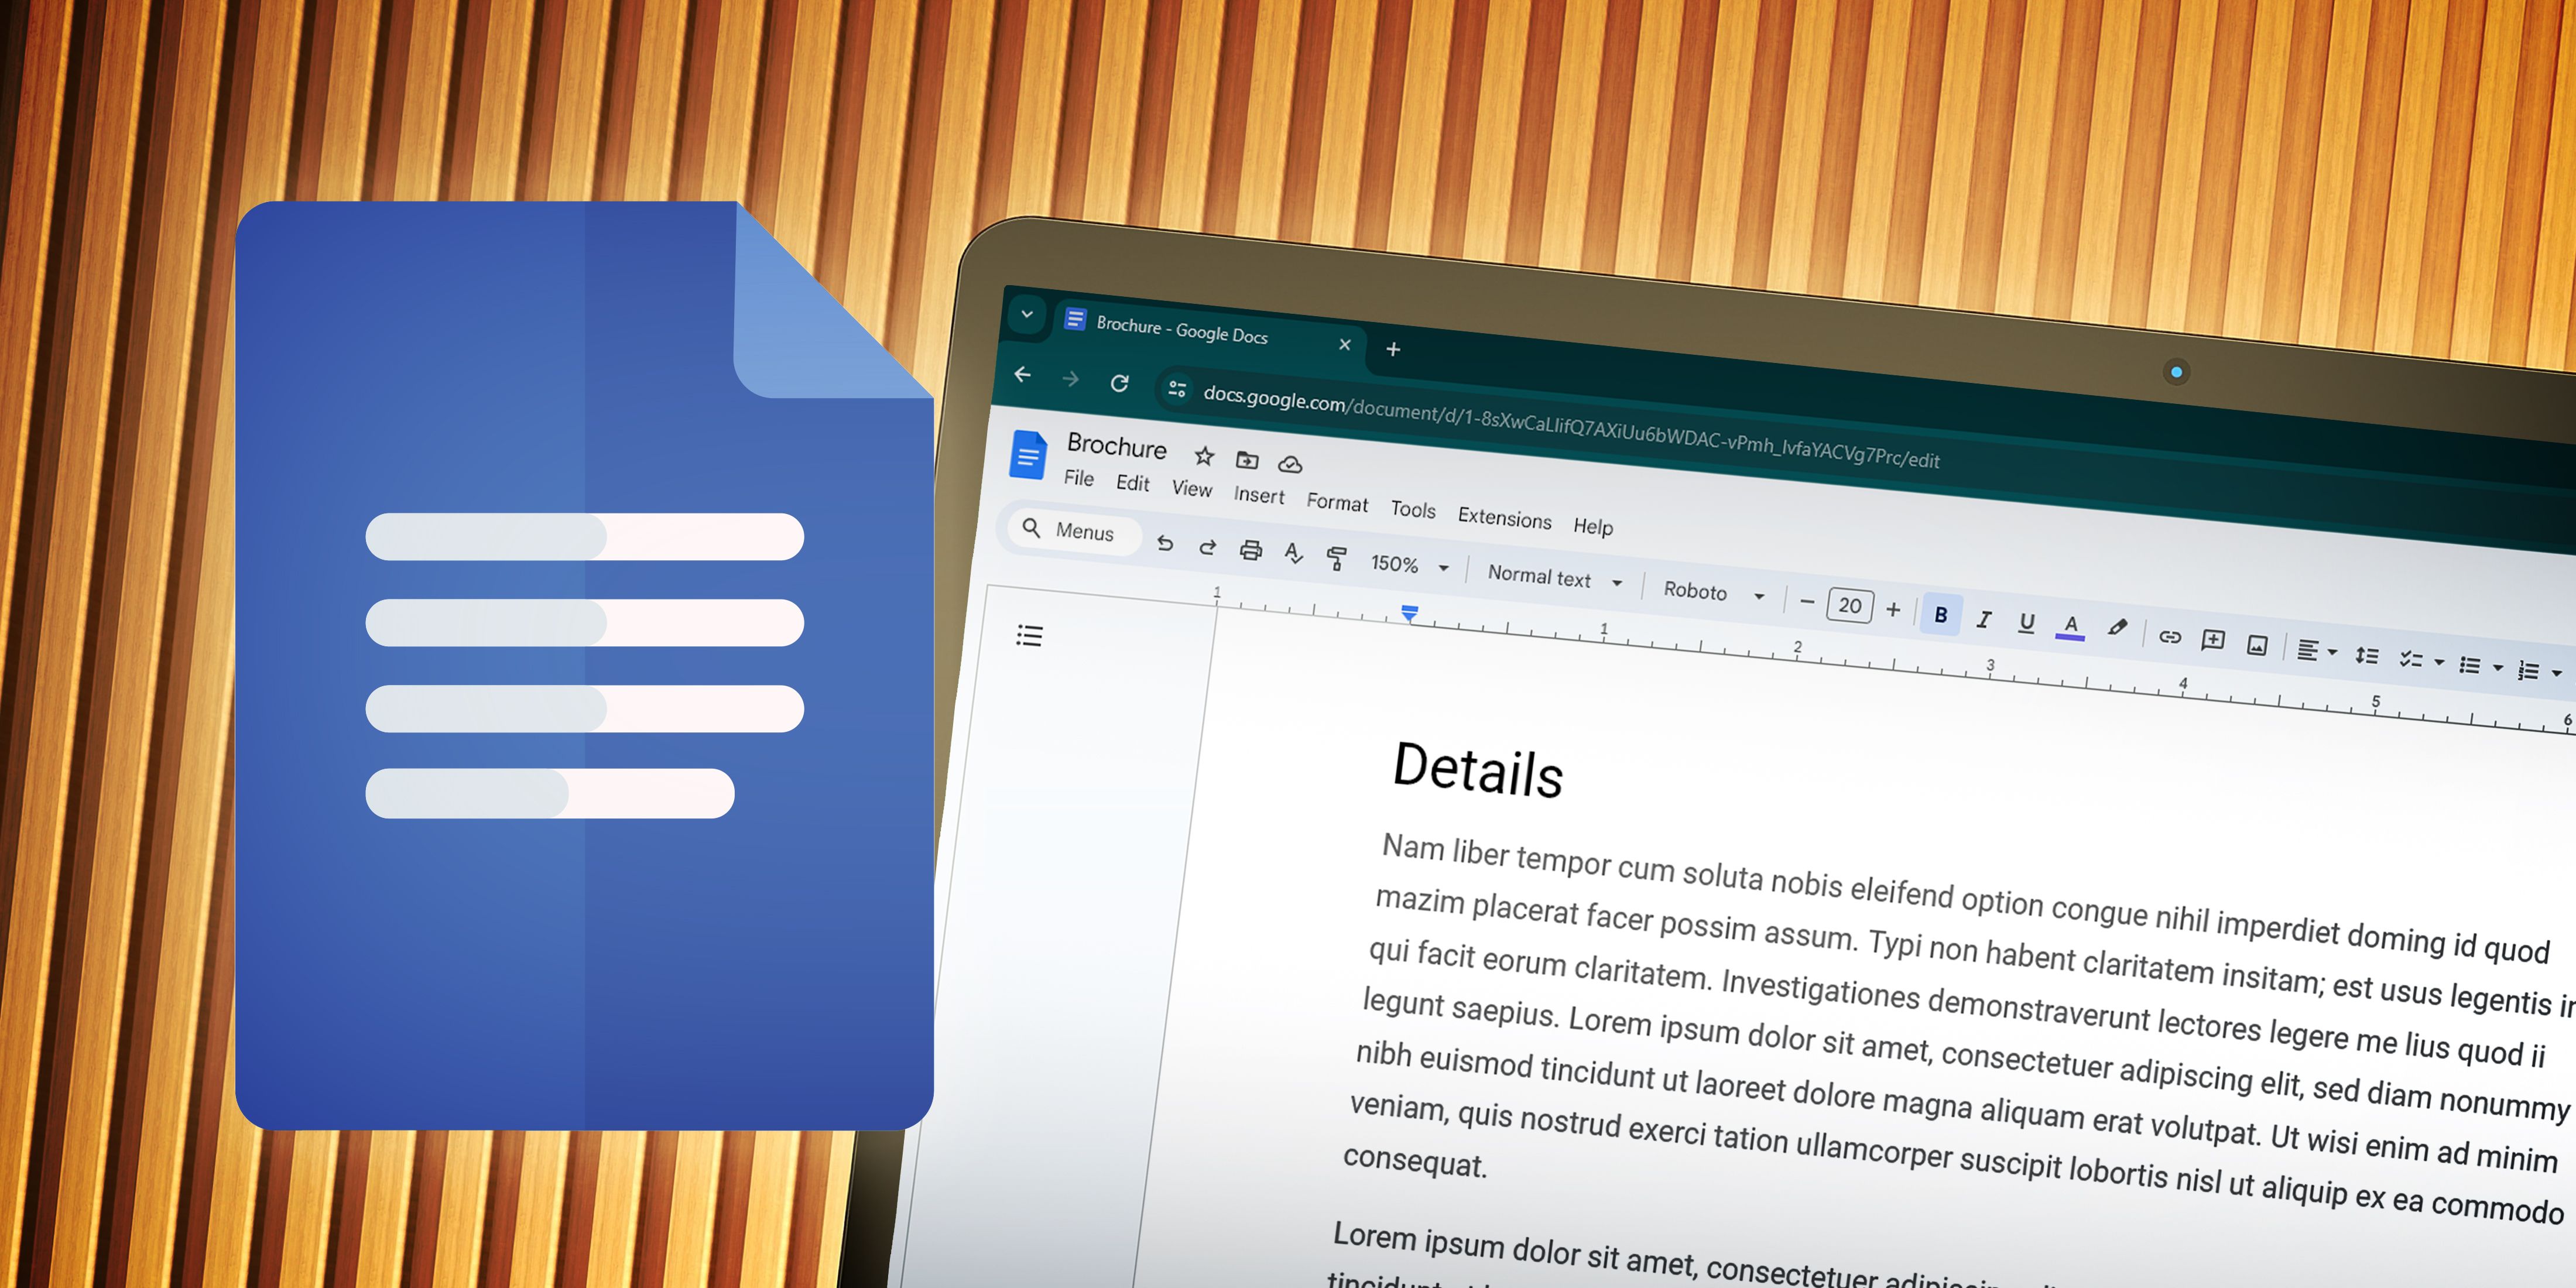 Laptop screen displaying a Google Docs document with a background icon of Google Docs